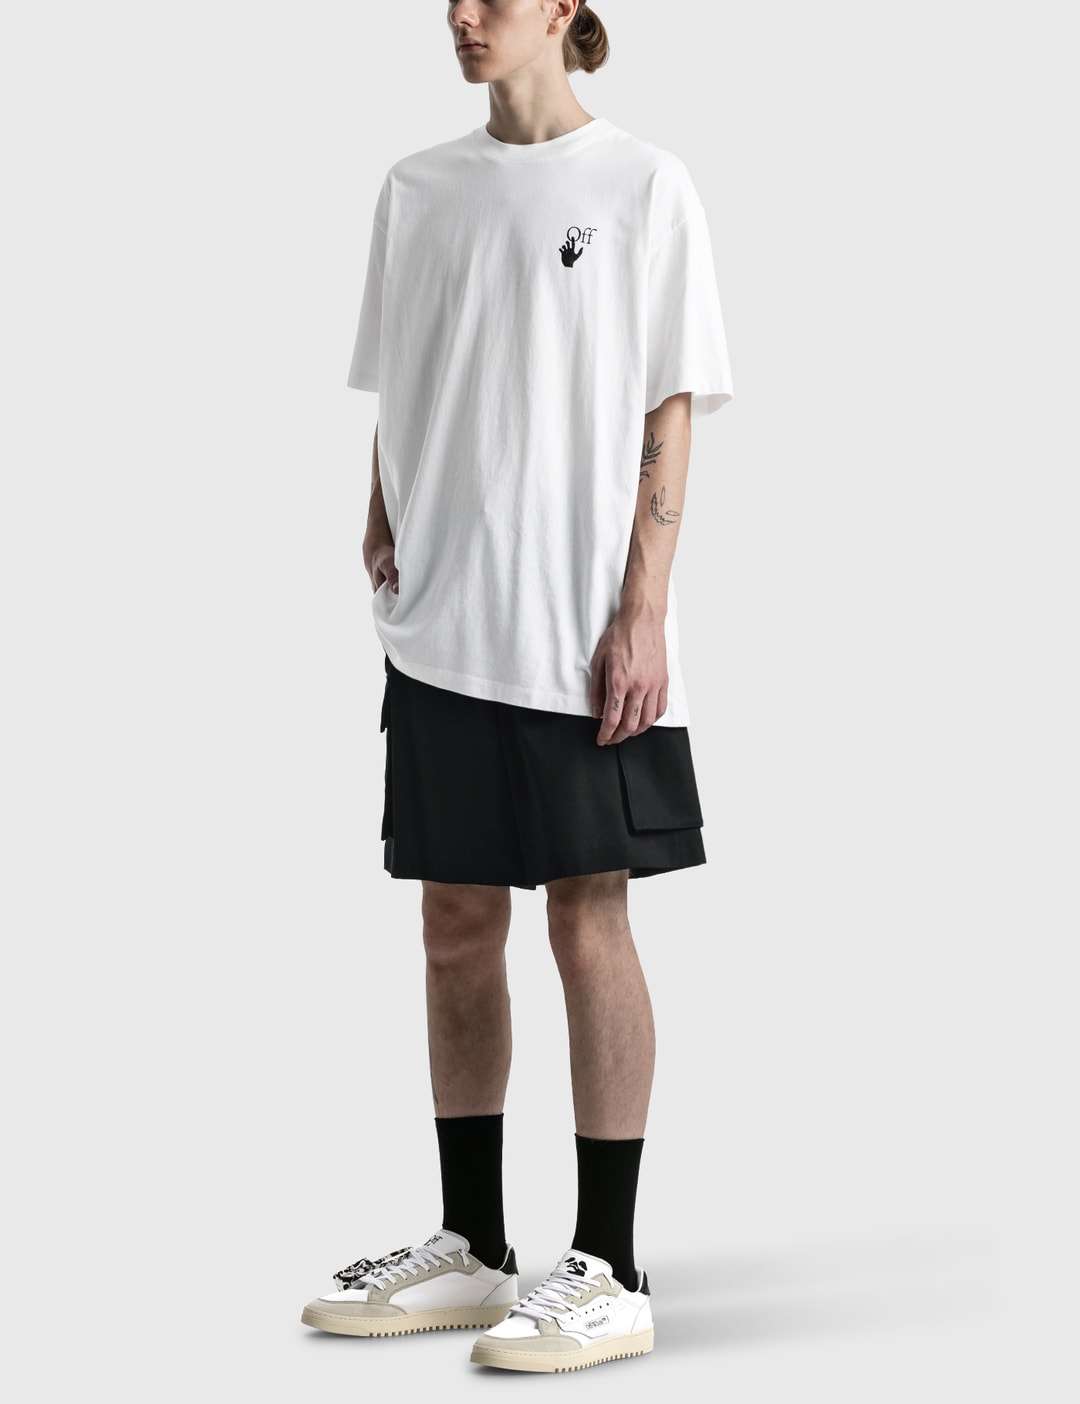 Off-White - Lute Player T-shirt | HBX - Globally Fashion Lifestyle by Hypebeast